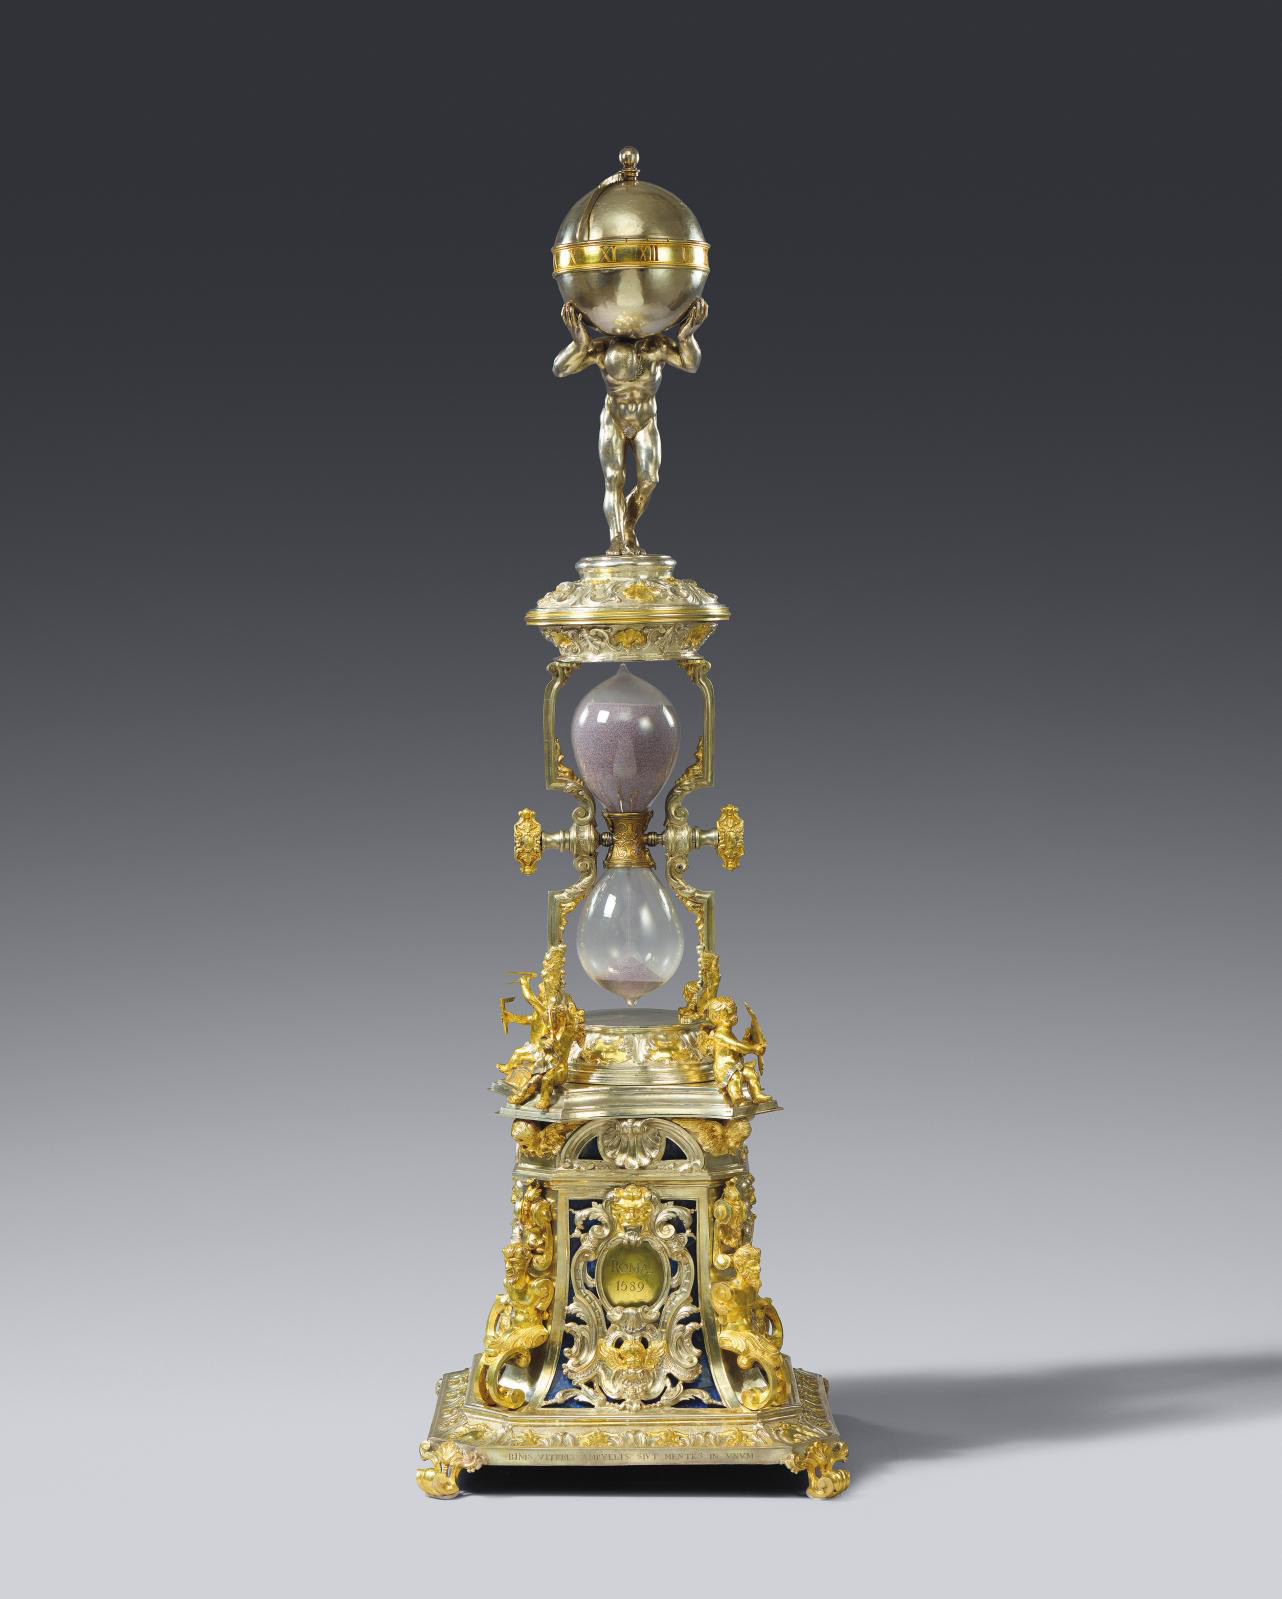 Rome 1589. Hourglass given by Pope Sixtus V to Ferdinand I de' Medici on the occasion of his marriage to Christine de Lorraine. Goldwork, 